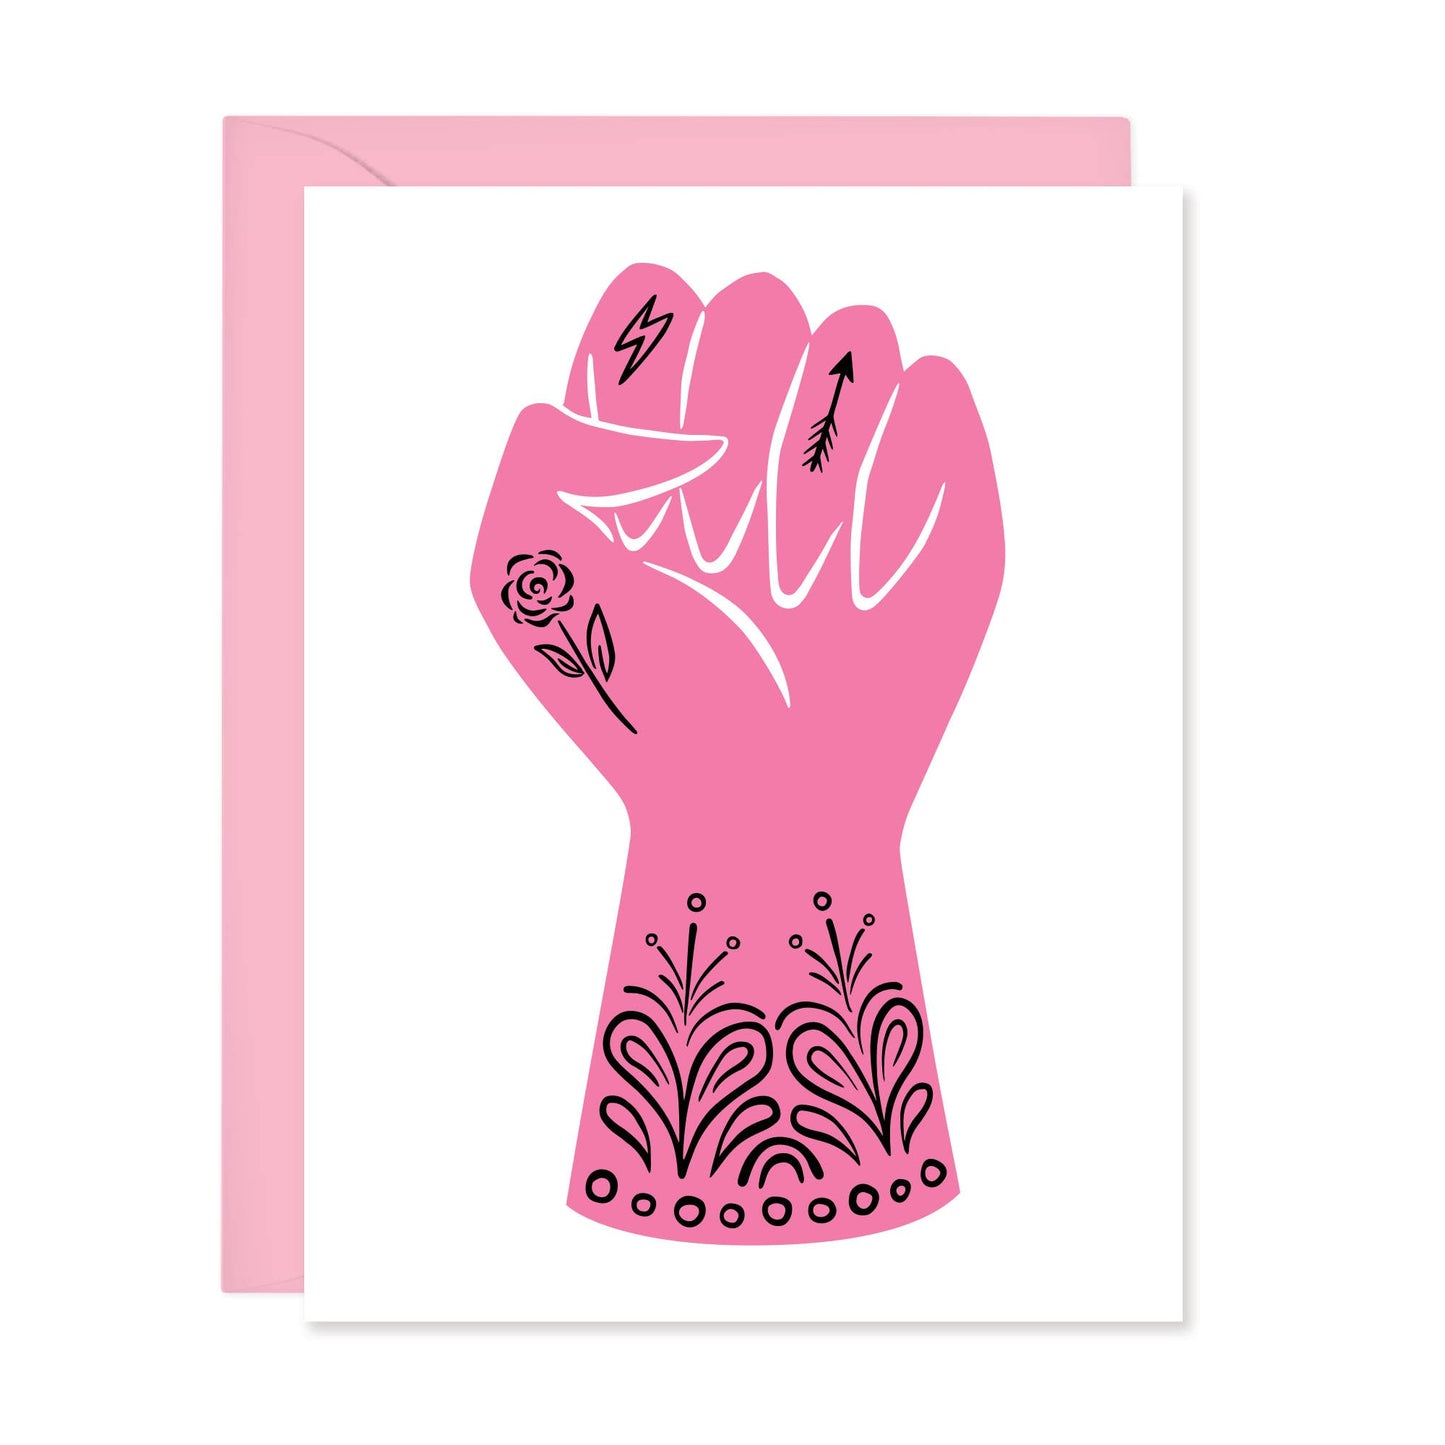 Lucy Loves Paper - Pink Power Fist Feminist Cards- Box Set of 8 - Size A2